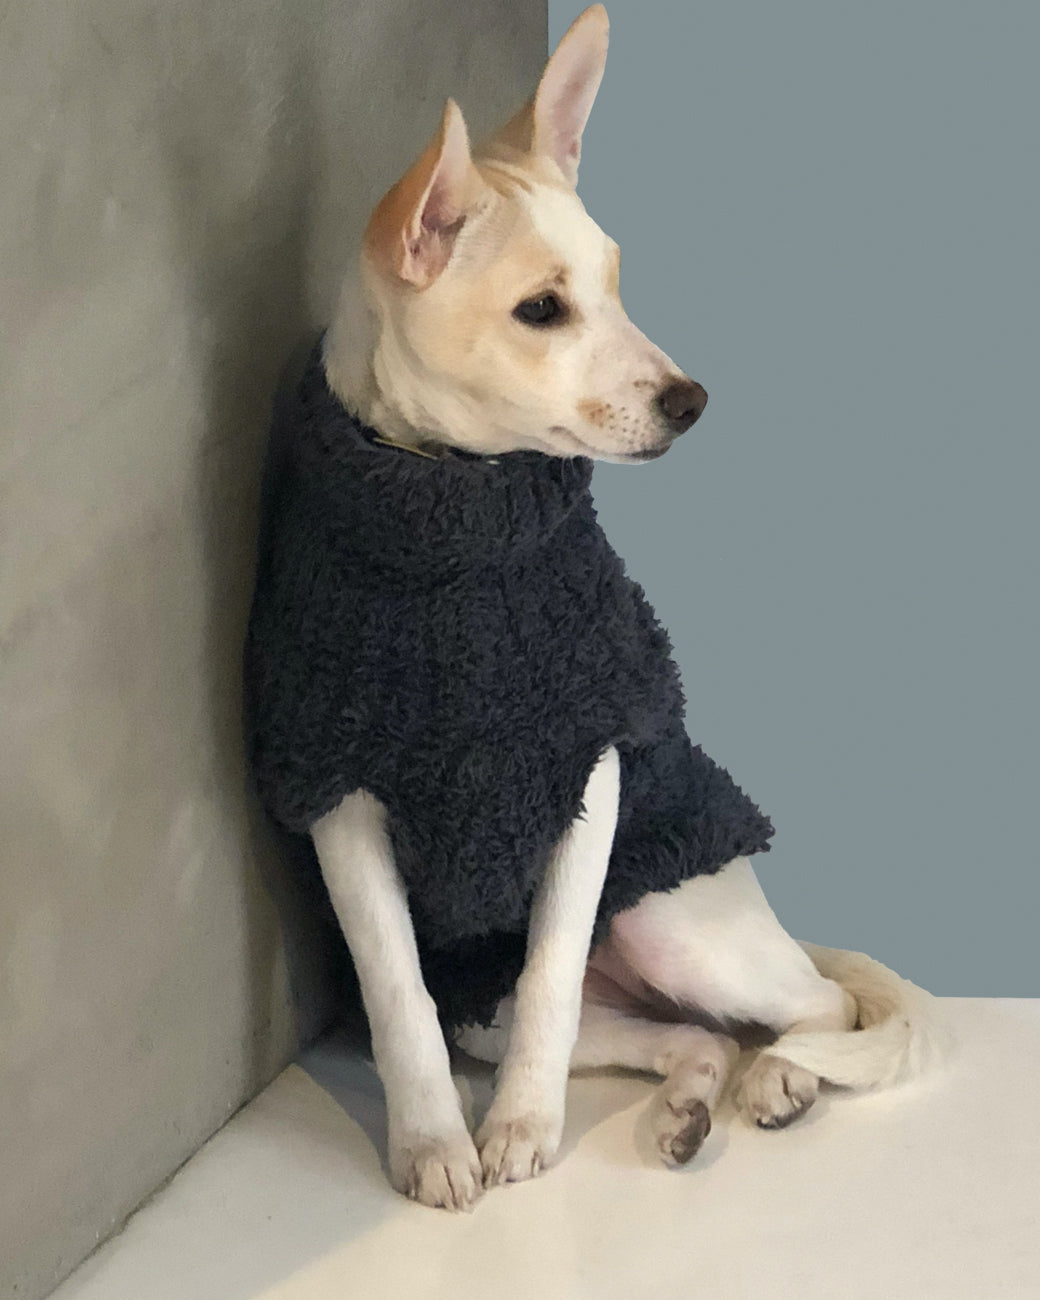 Gray dog sweater, shown on body.